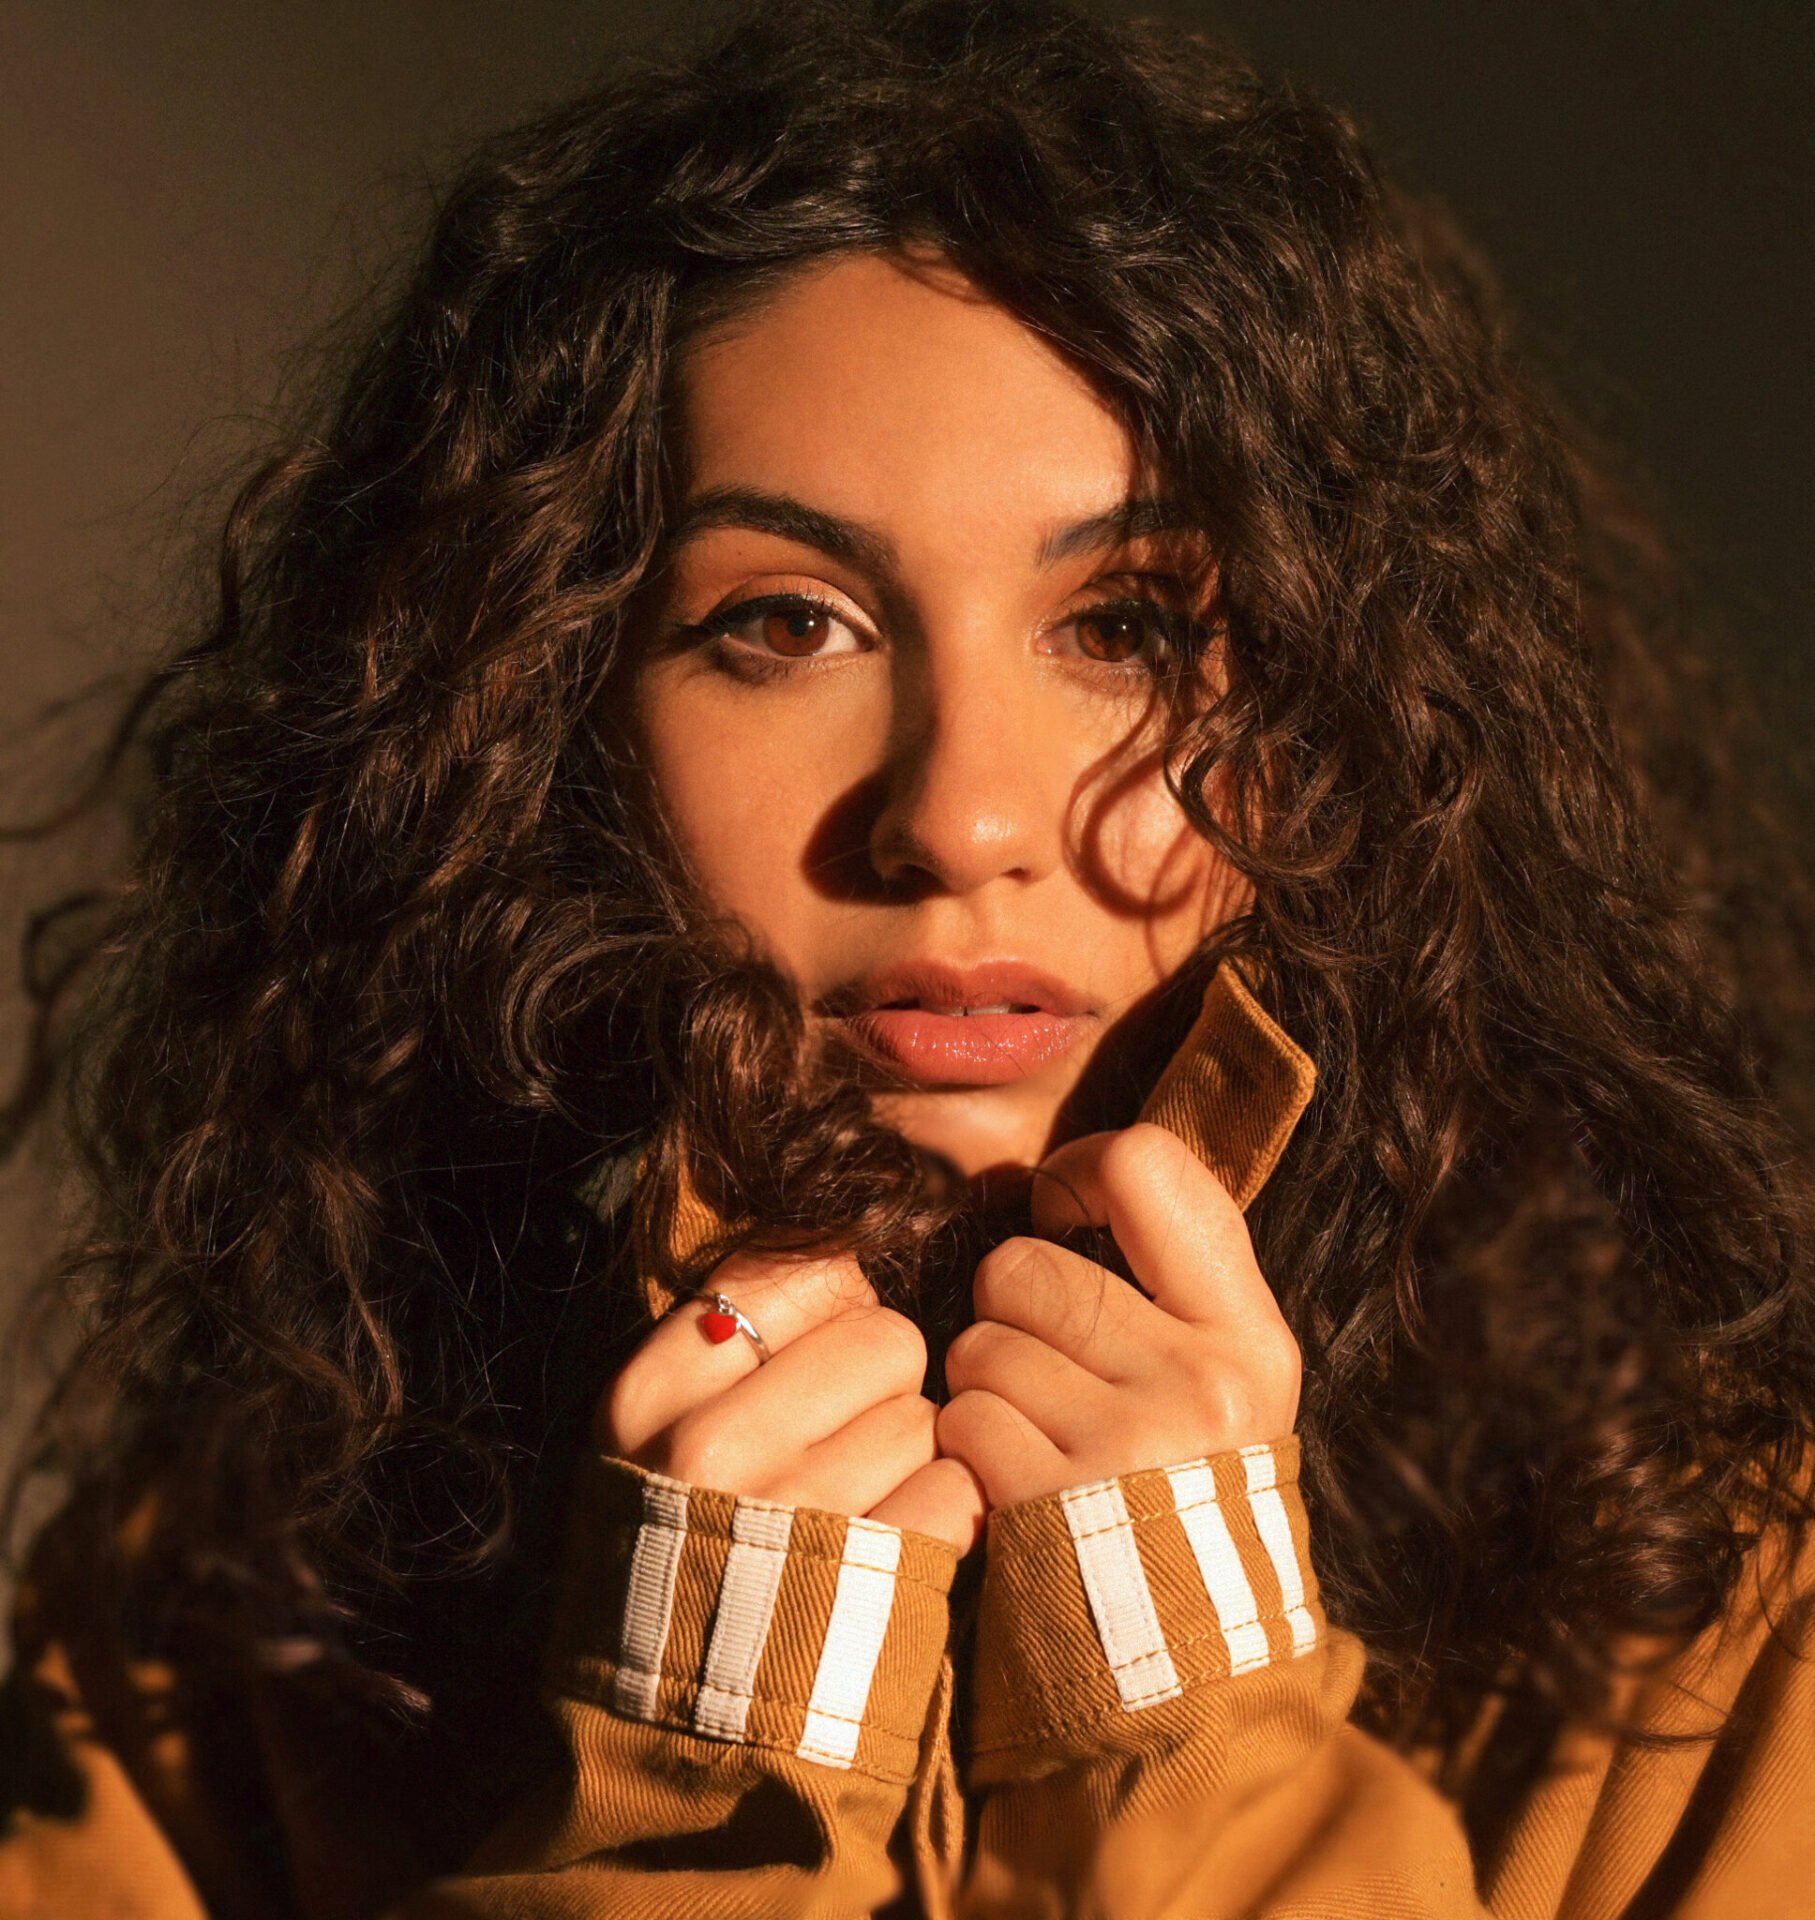 Alessia Cara premieres the video for her new single "You Let Me Down."